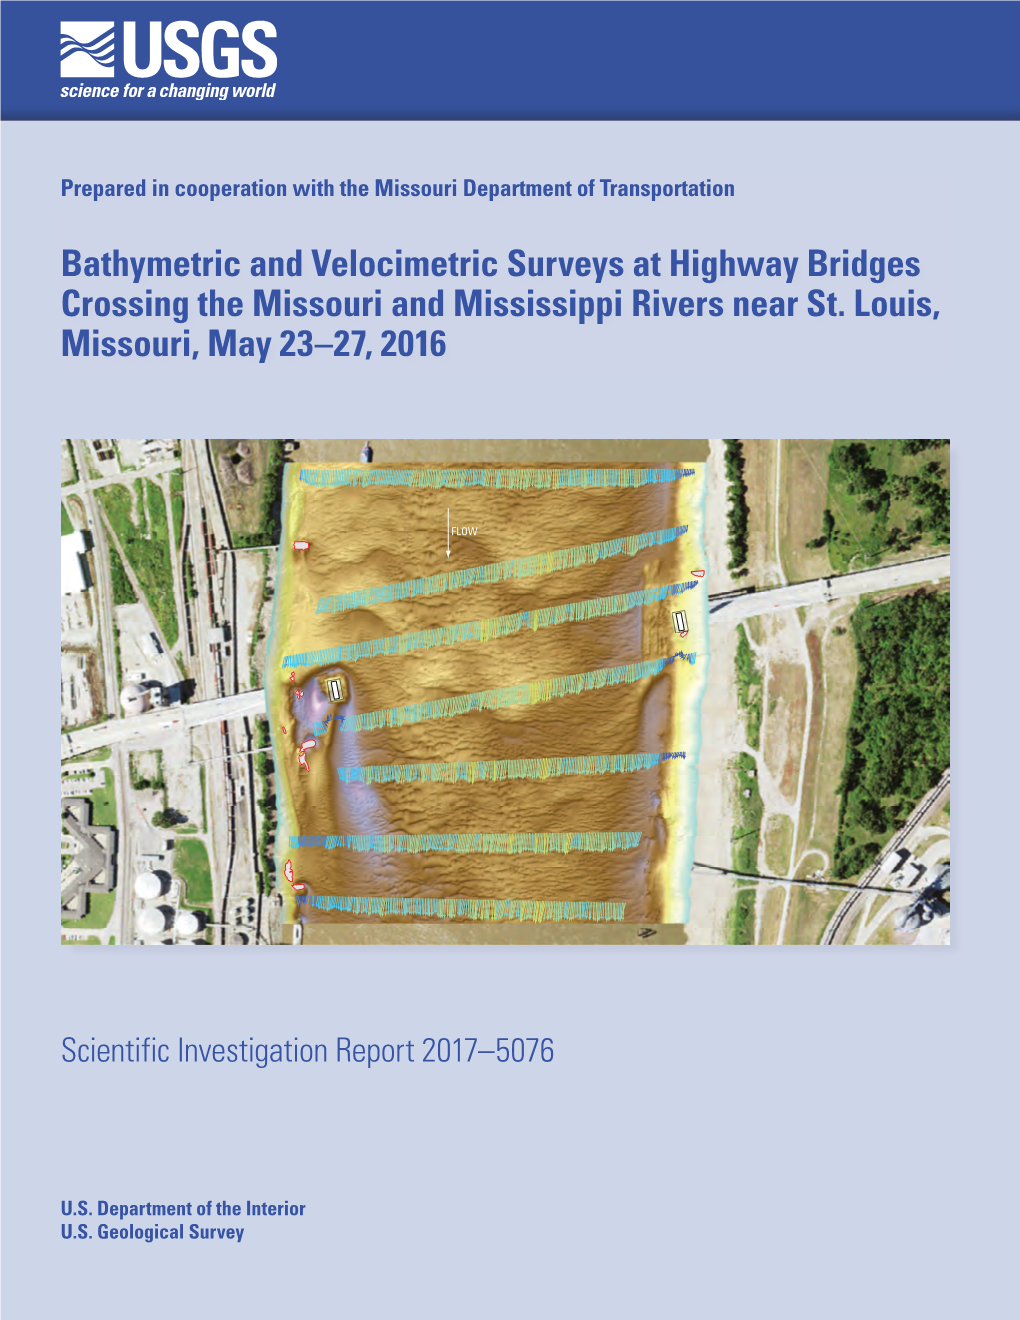 Bathymetric and Velocimetric Surveys at Highway Bridges Crossing the Missouri and Mississippi Rivers Near St. Louis, Missouri, May 23–27, 2016